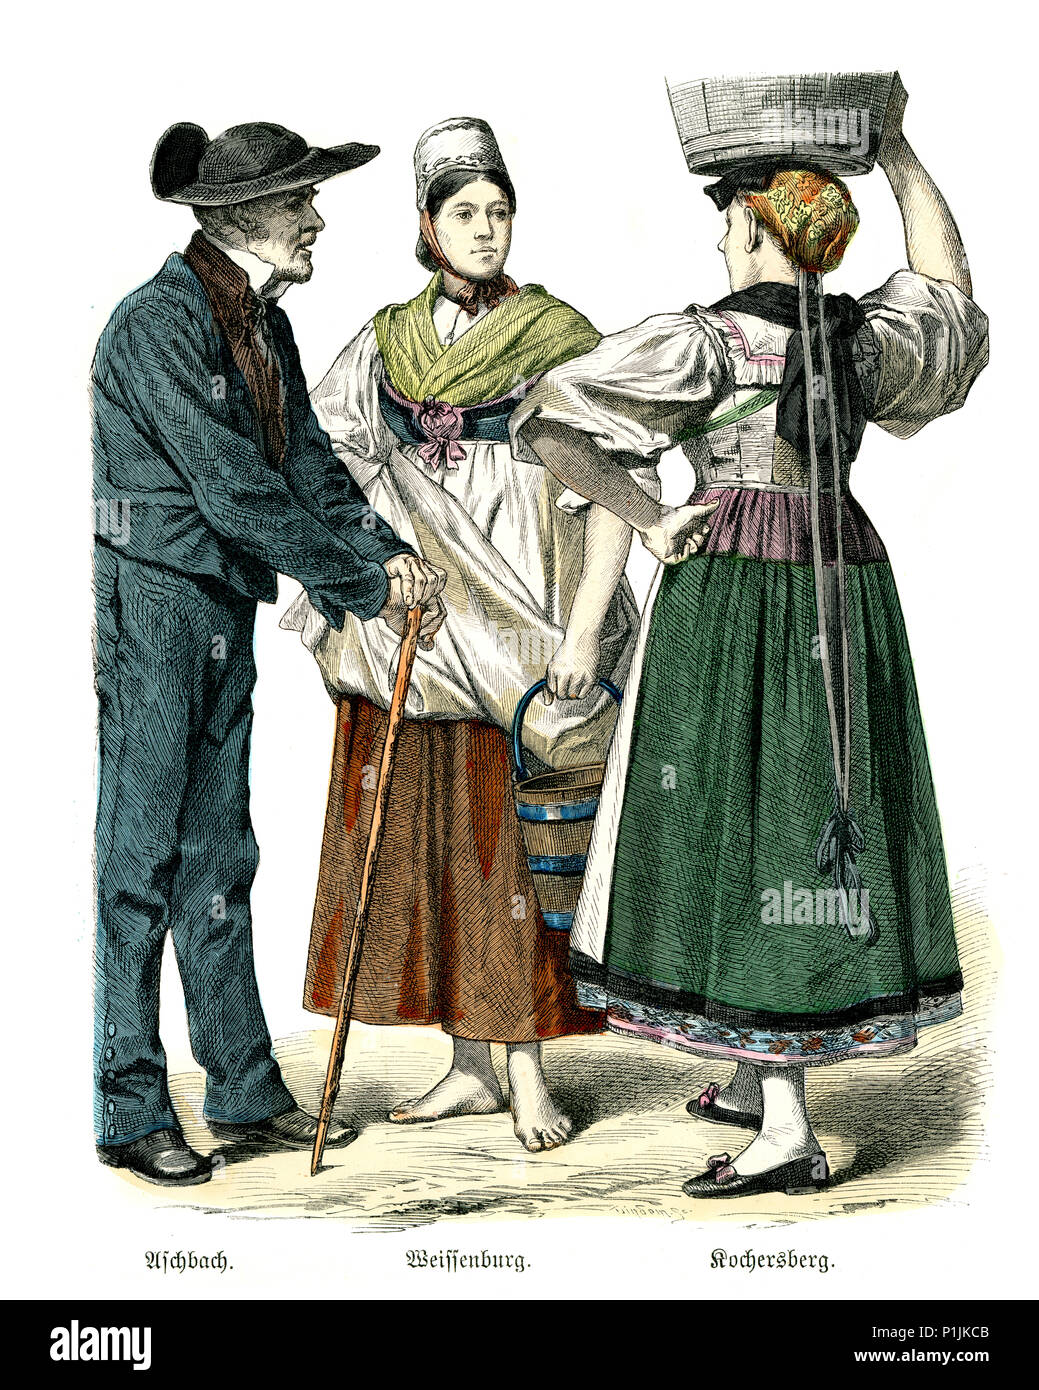 Vintage engraving of History of Fashion, Costumes of Alsace, 19th Century. Aschbach, Wissembourg and Kochersberg Stock Photo